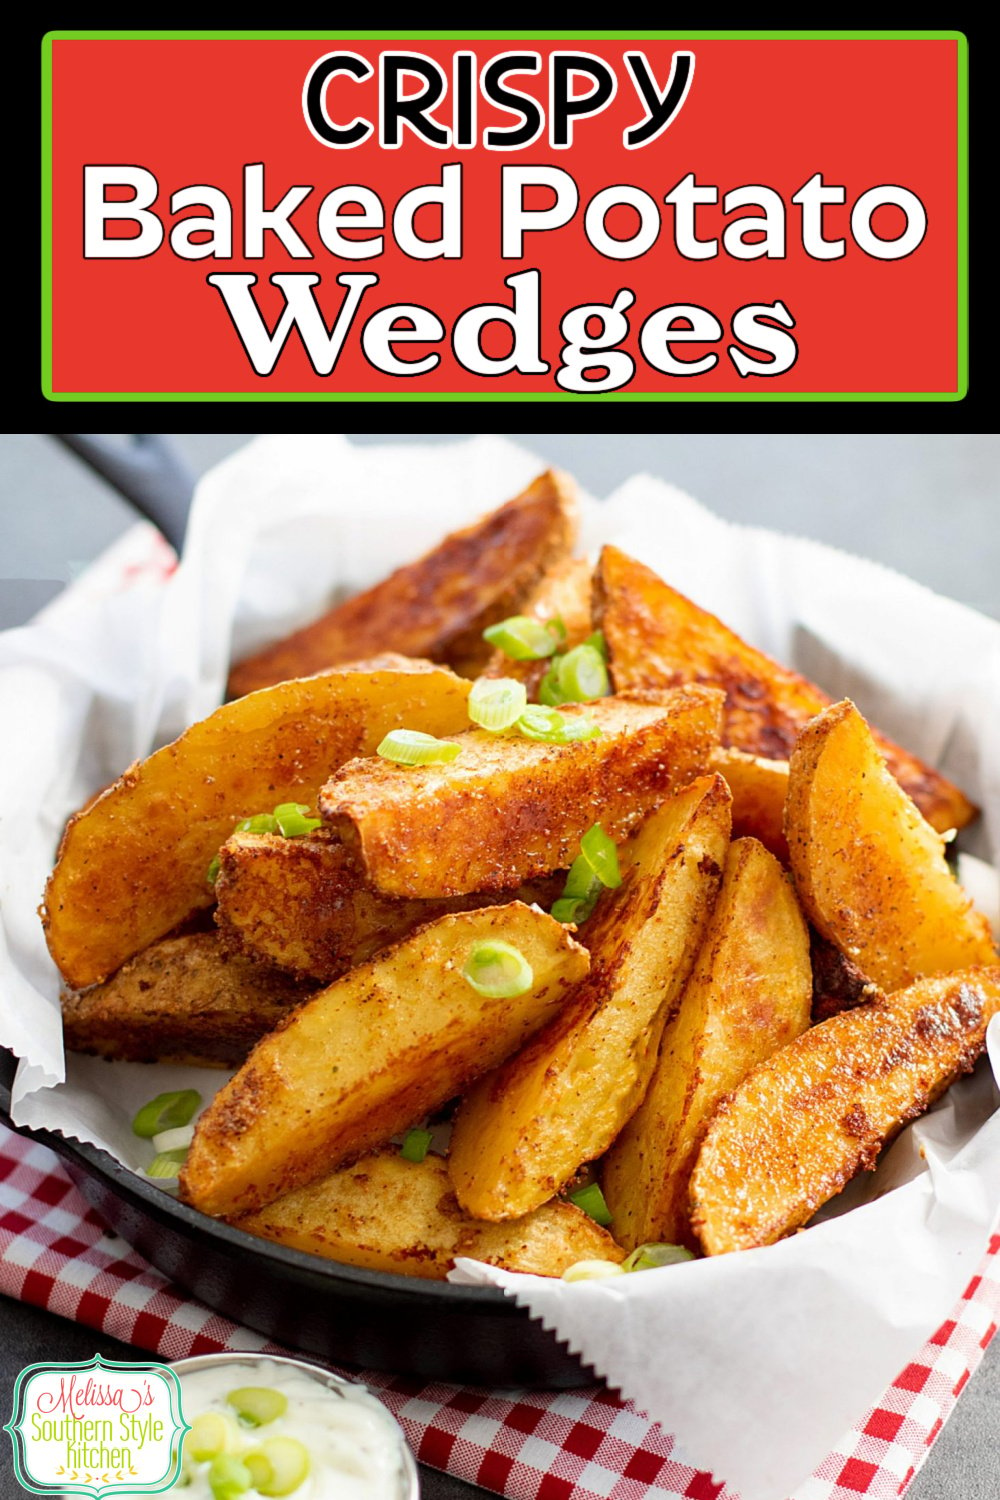 These super easy Crispy Baked Potato Wedges can be served as an appetizer, game day snack or a side dish #crispypotatoes #crispypotatowedges #potatowedges #potatoes #potatorecipes #bakedpotatoes #easysidedishrecipes #easypotatorecipes #southernrecipes via @melissasssk